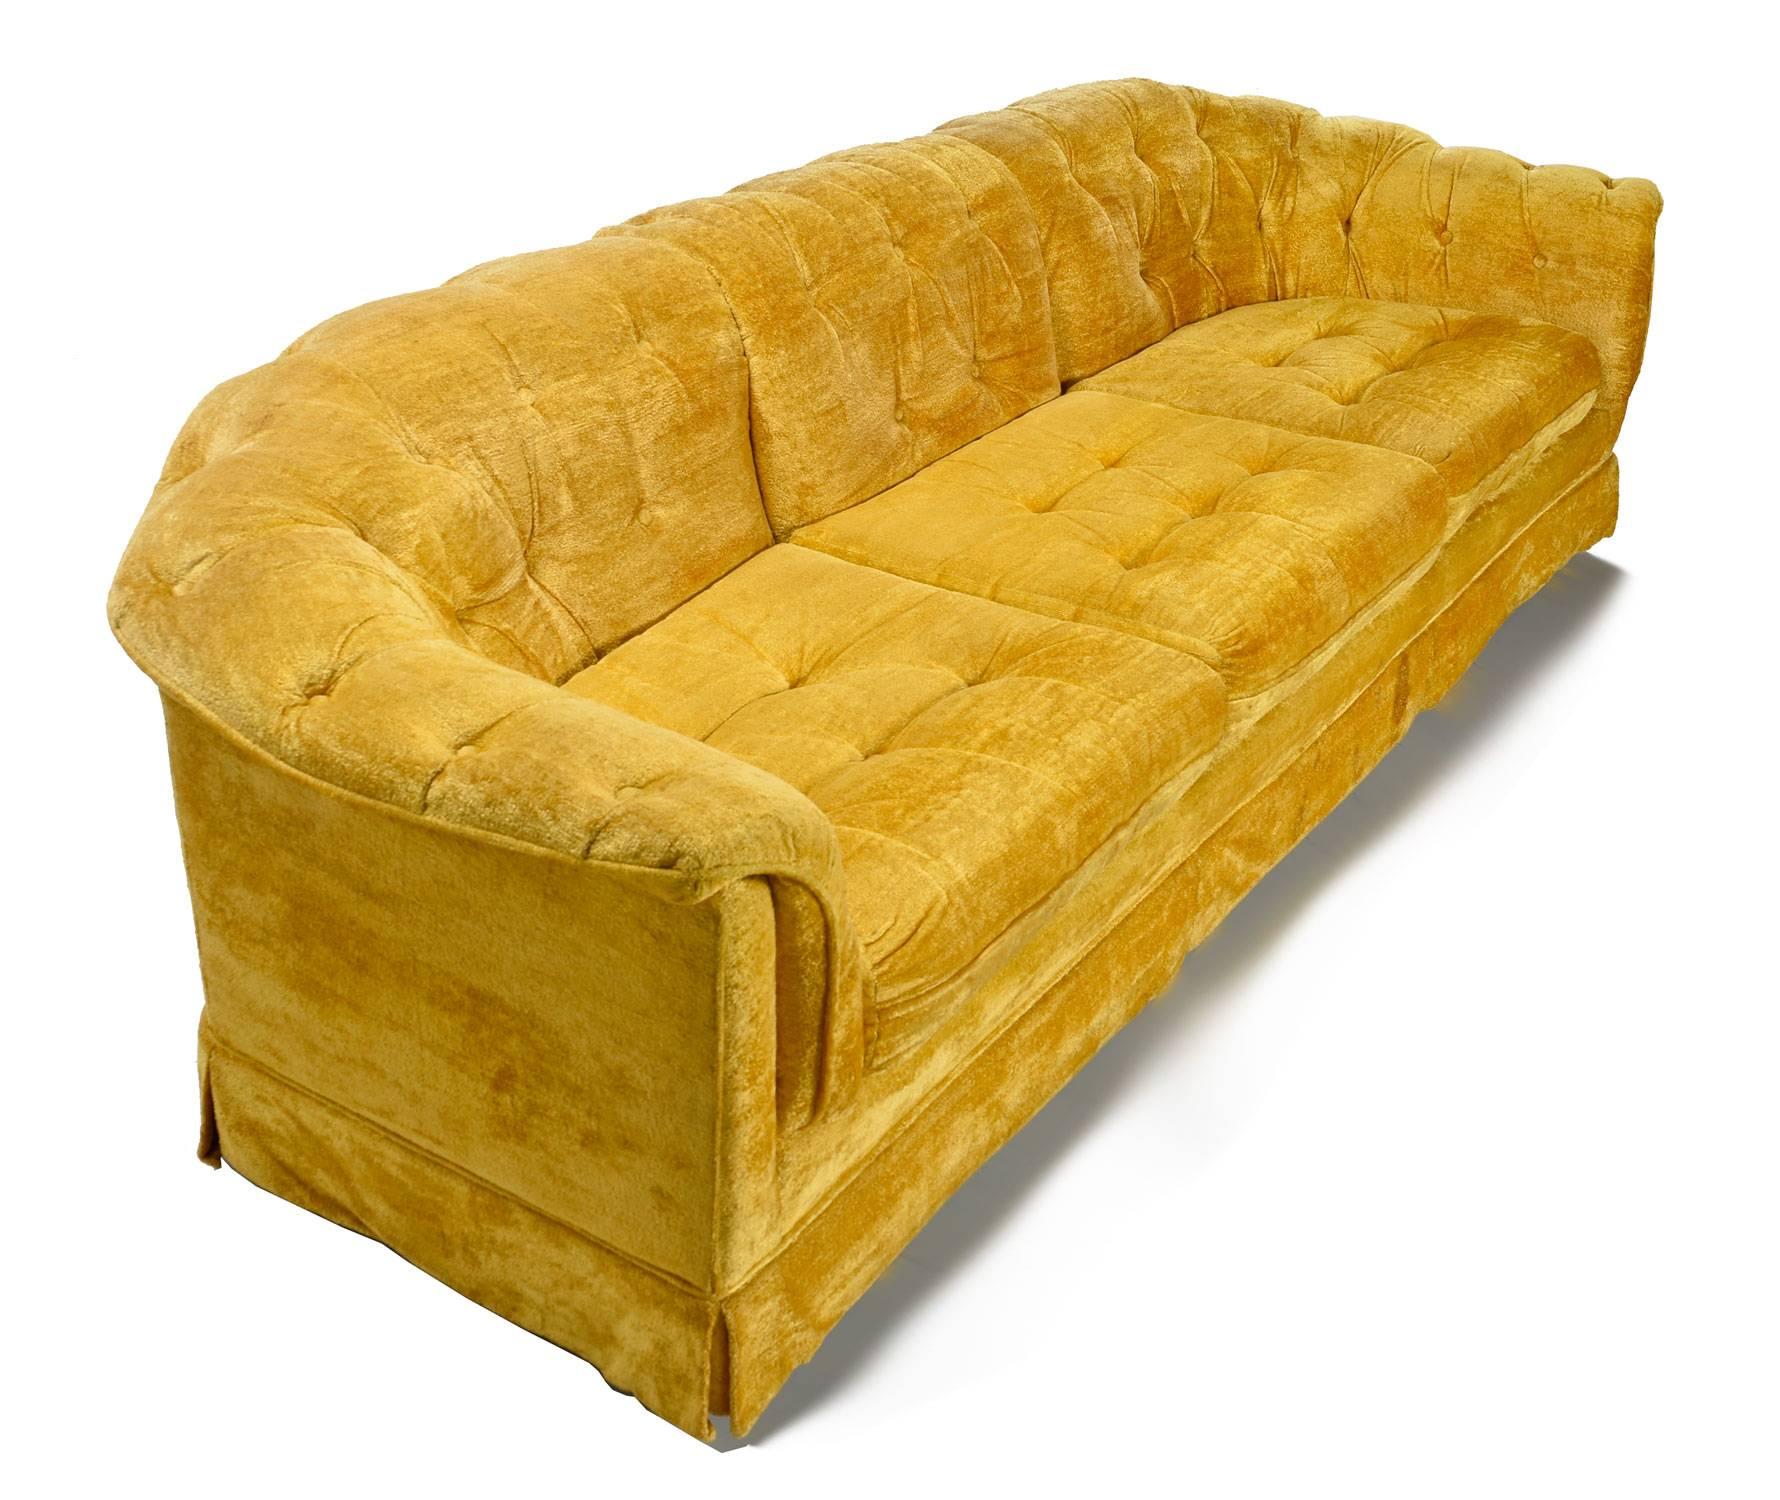 Vintage 1960s large three seat marigold colored velvet tufted sofa. The plush sofa is ultra comfortable! Completely original, in outstanding condition, a true time capsule piece. One does not have to compromise comfort for style with this Hollywood